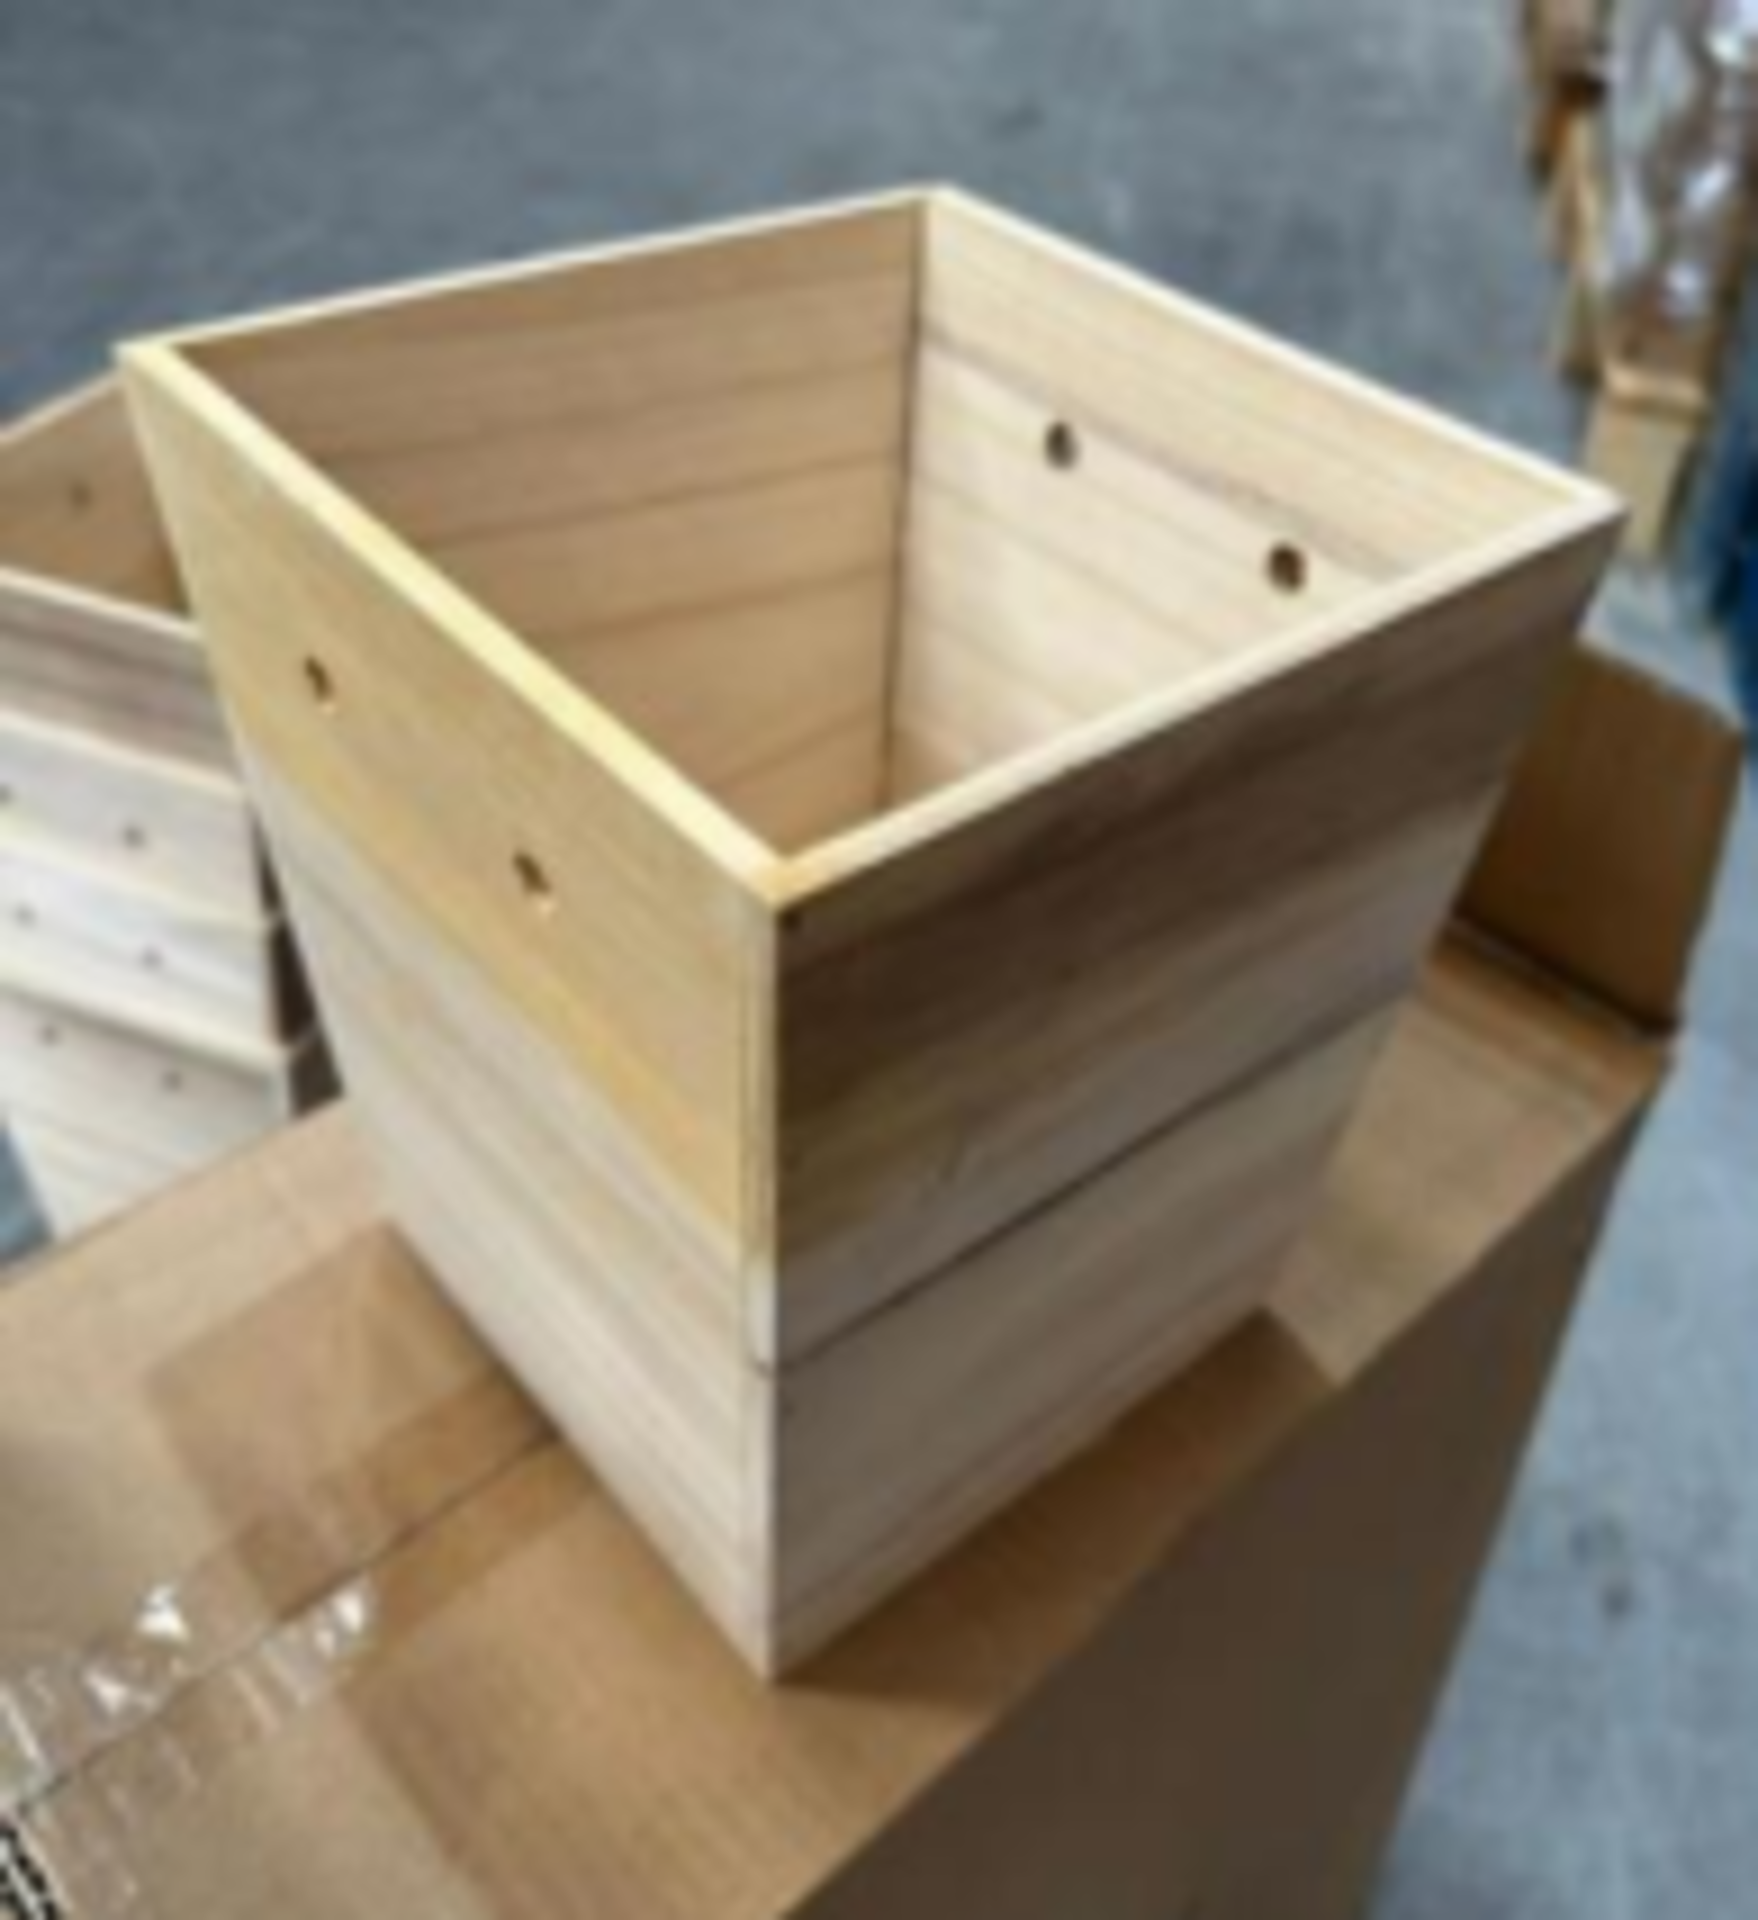 5 X BRAND NEW BOXES OF 10 WOODEN PLANTERS S1-1/R17-1